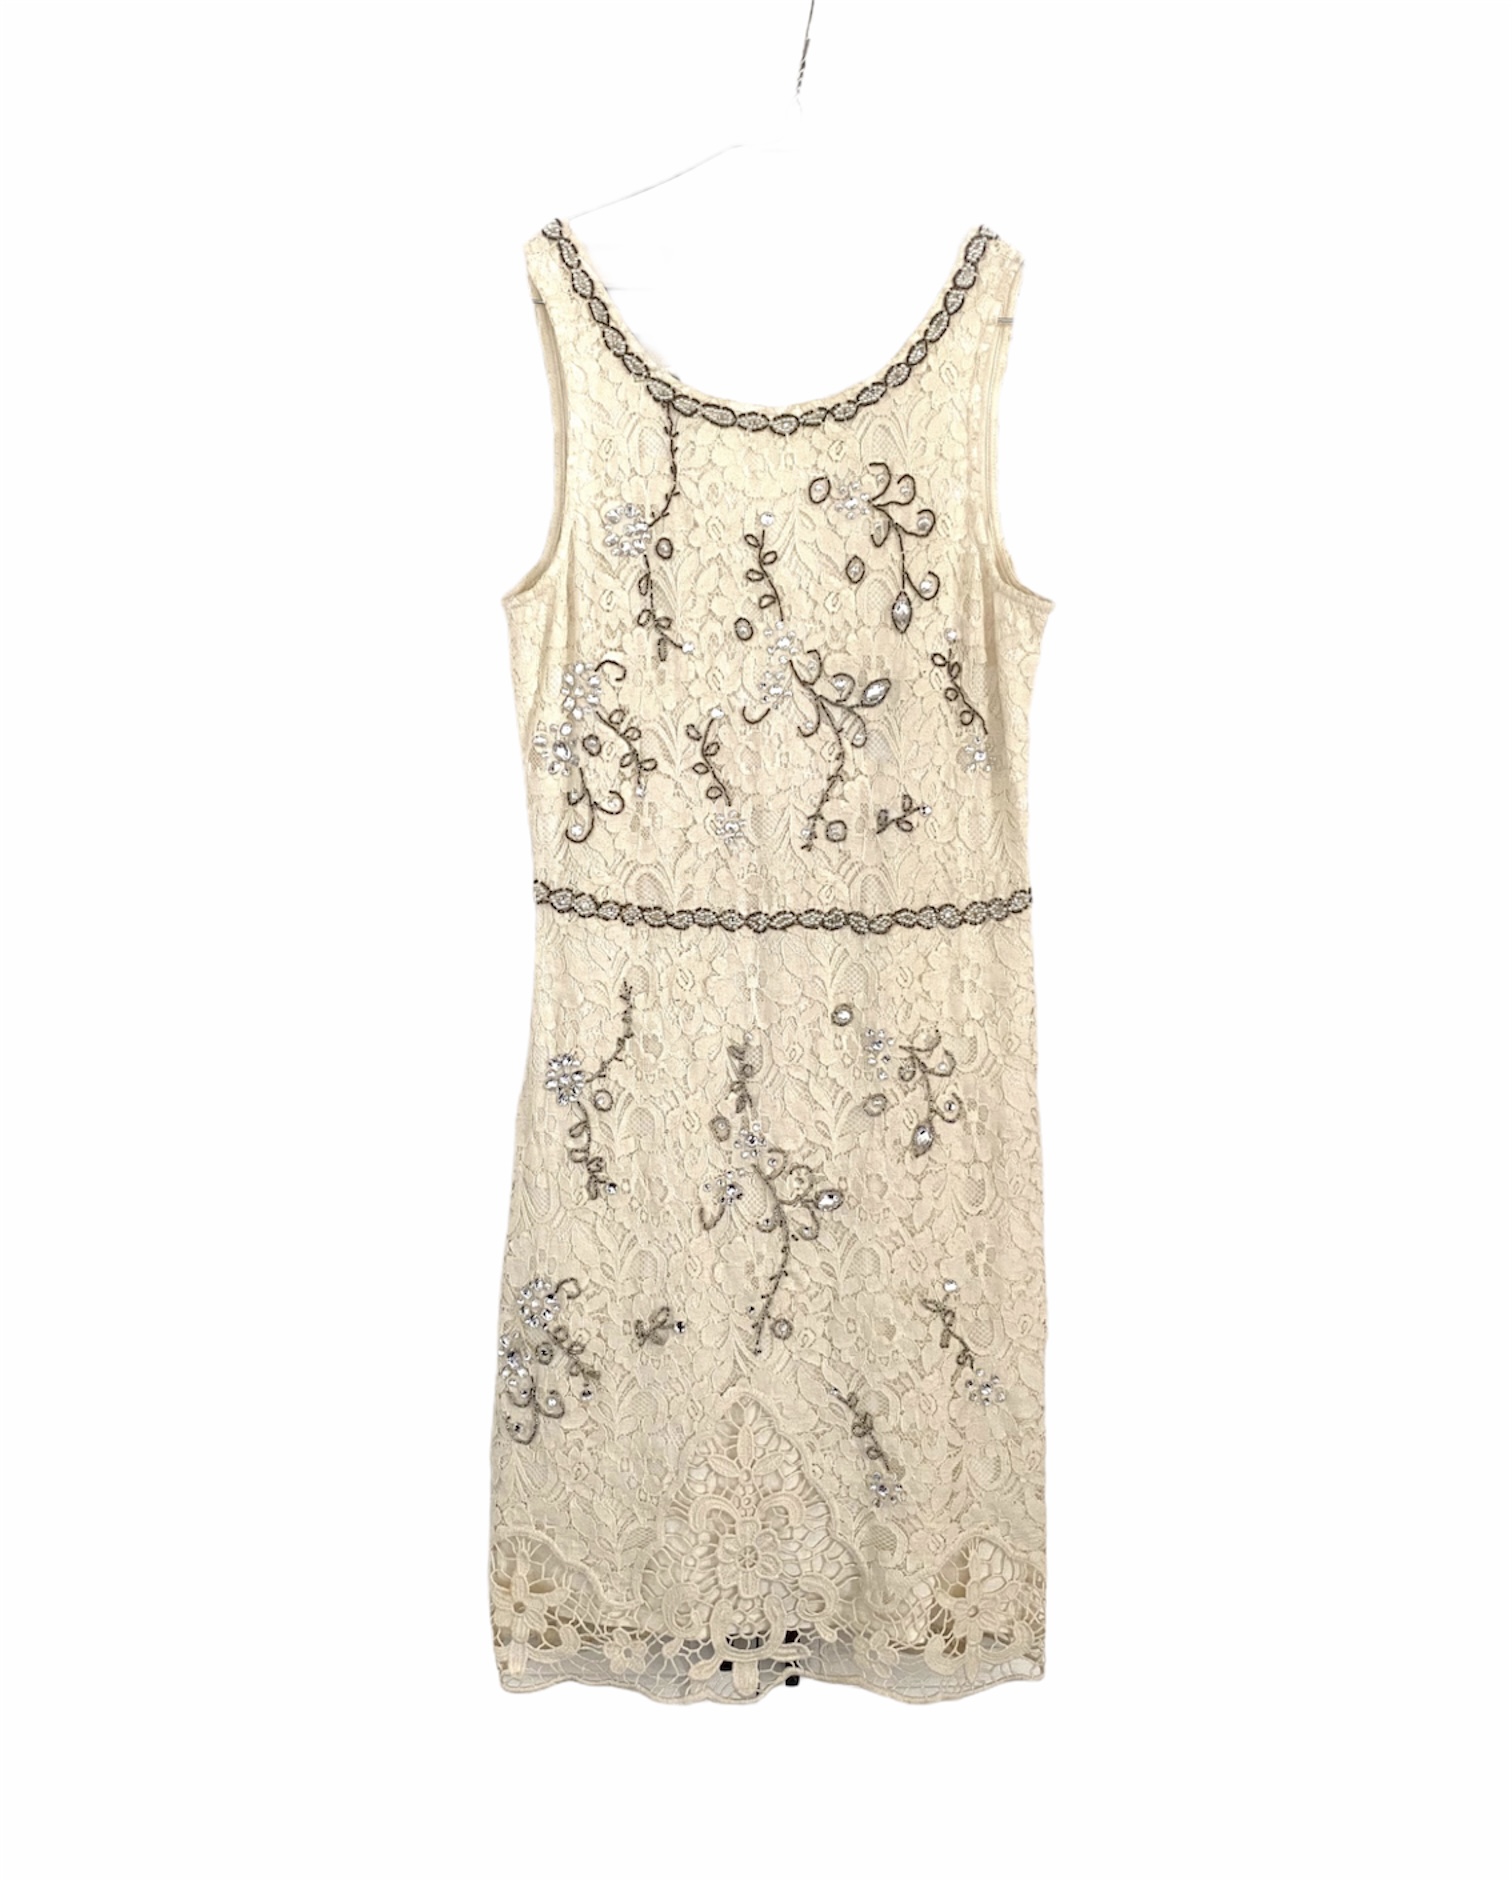 Forever New Lace Jewelled Dress - Size 8 - The Re: Club